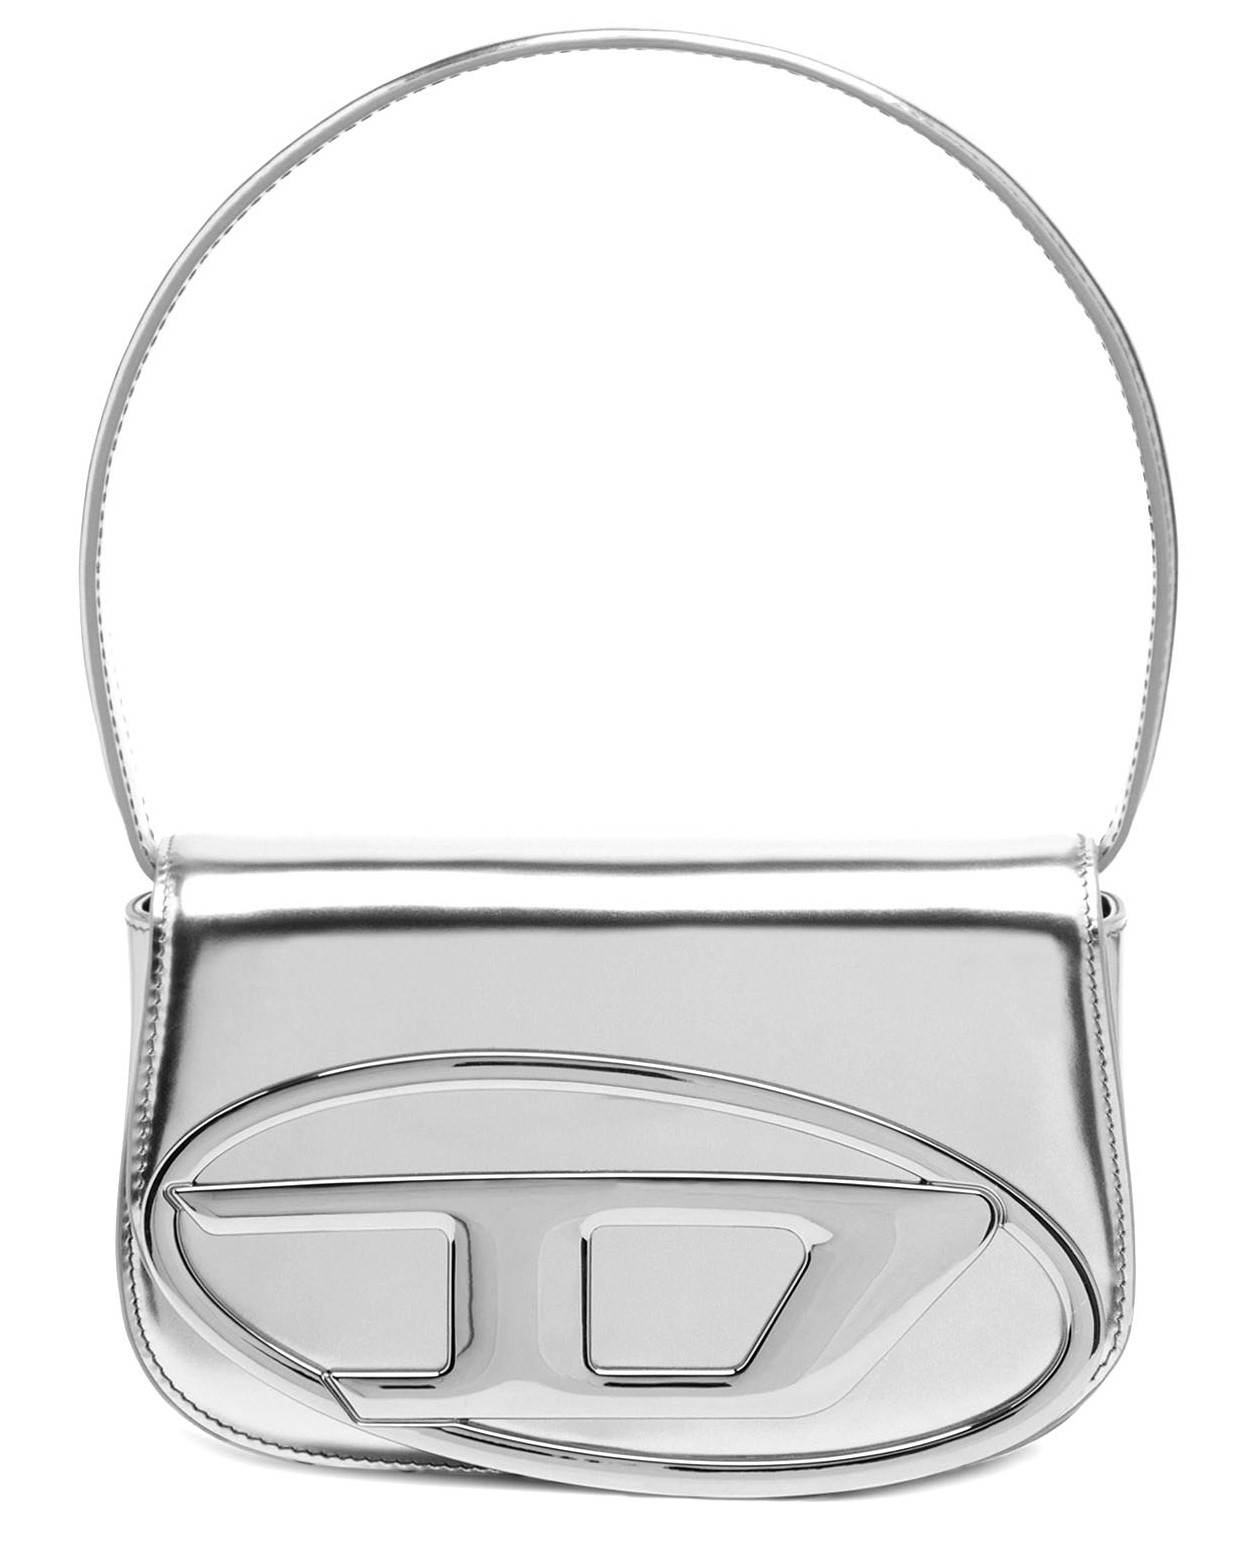 TÚI ĐEO VAI NỮ DIESEL WOMENS 1DR ICONIC SHOULDER BAG IN SILVER MIRRORED LEATHER MÀU BẠC 18